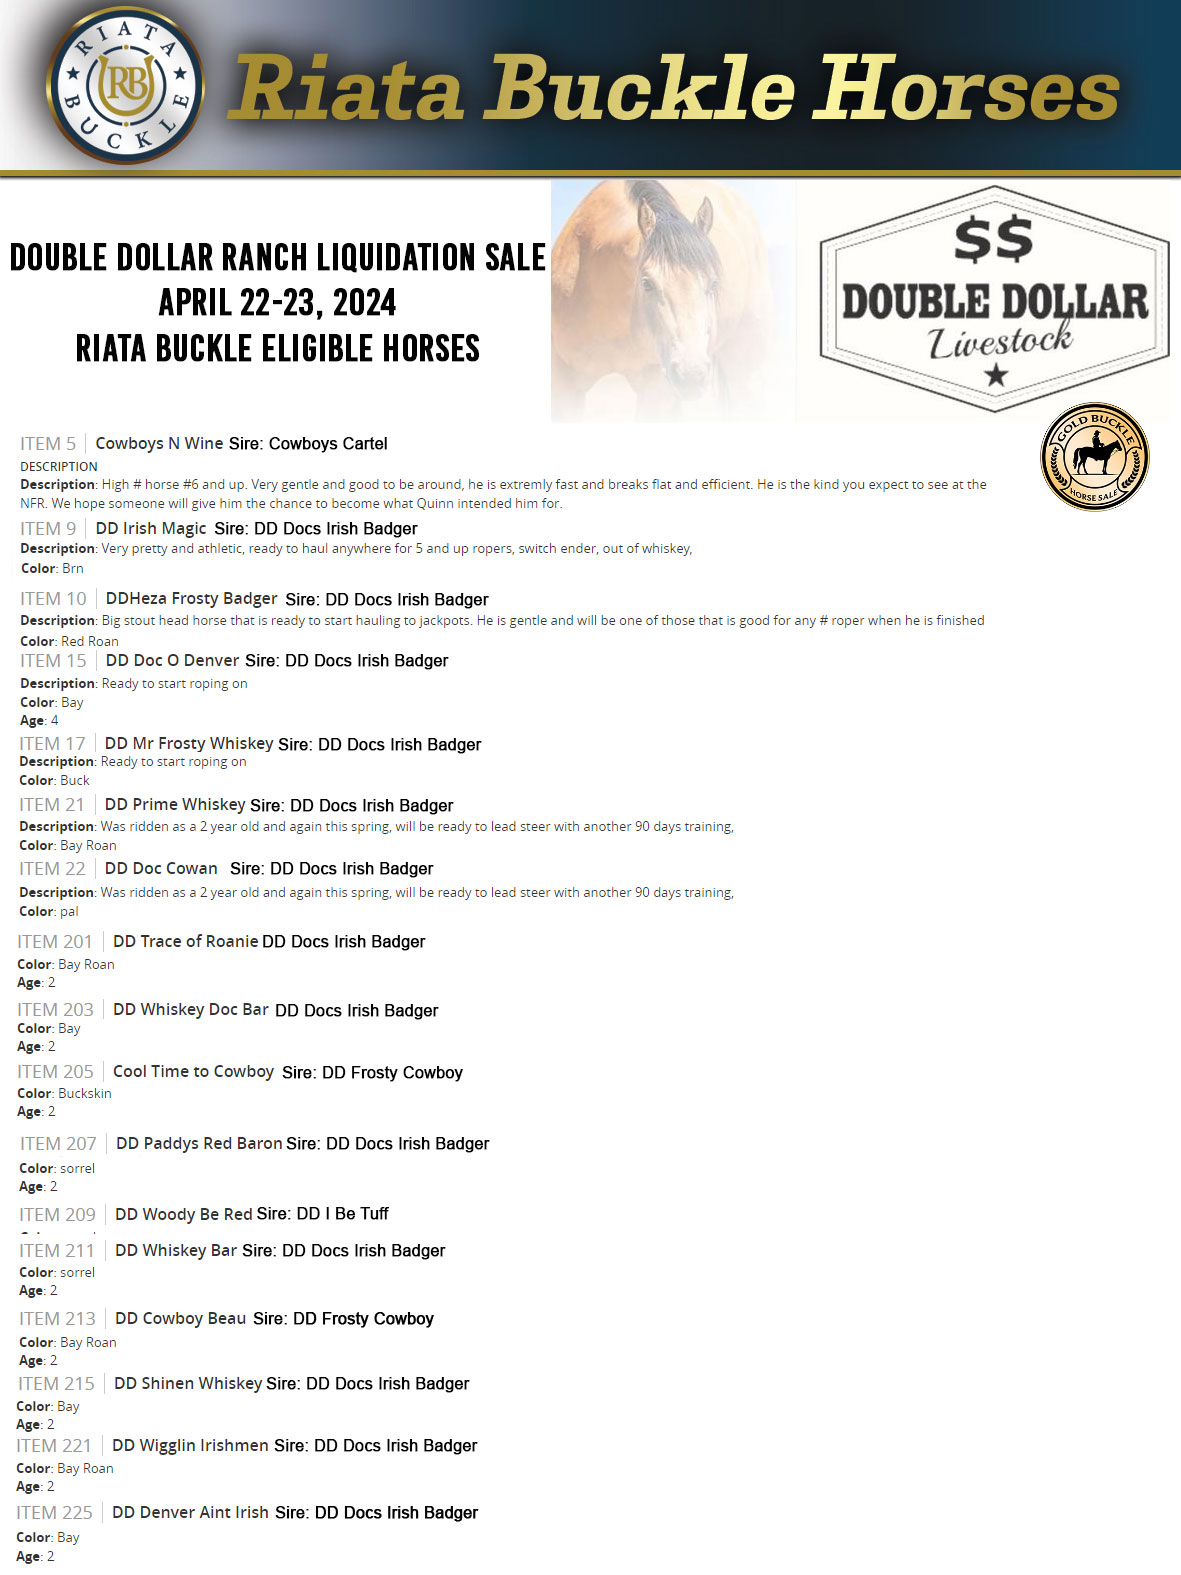 Event Ad for Double Dollar Ranch Liquidation Sale